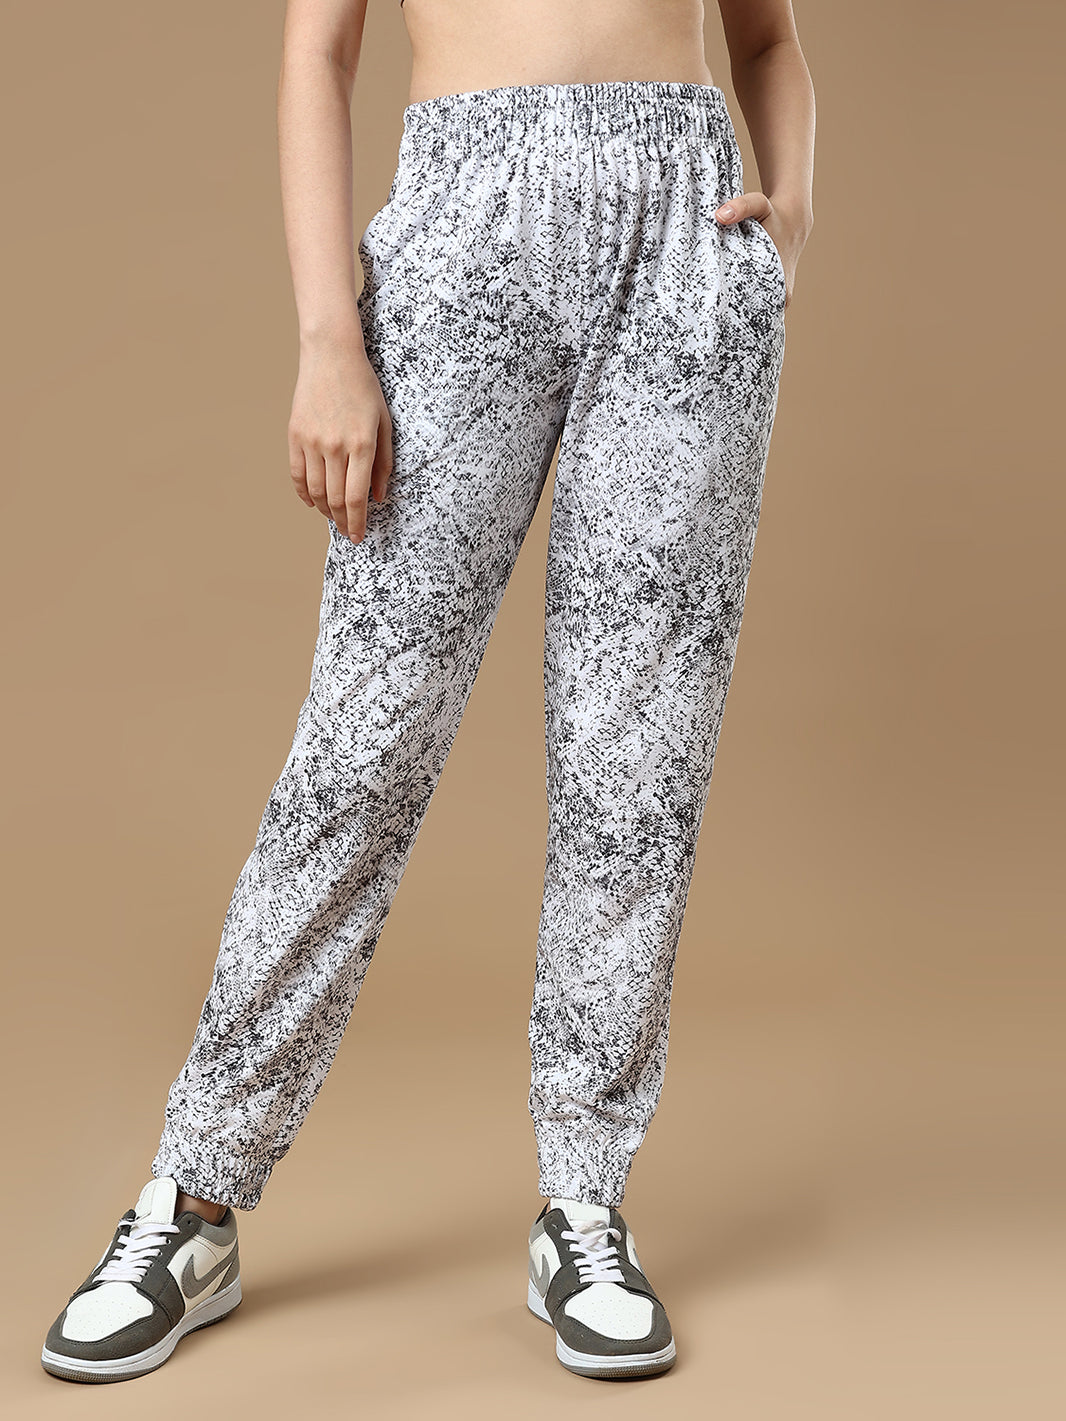 Women Grey and White Color Pant